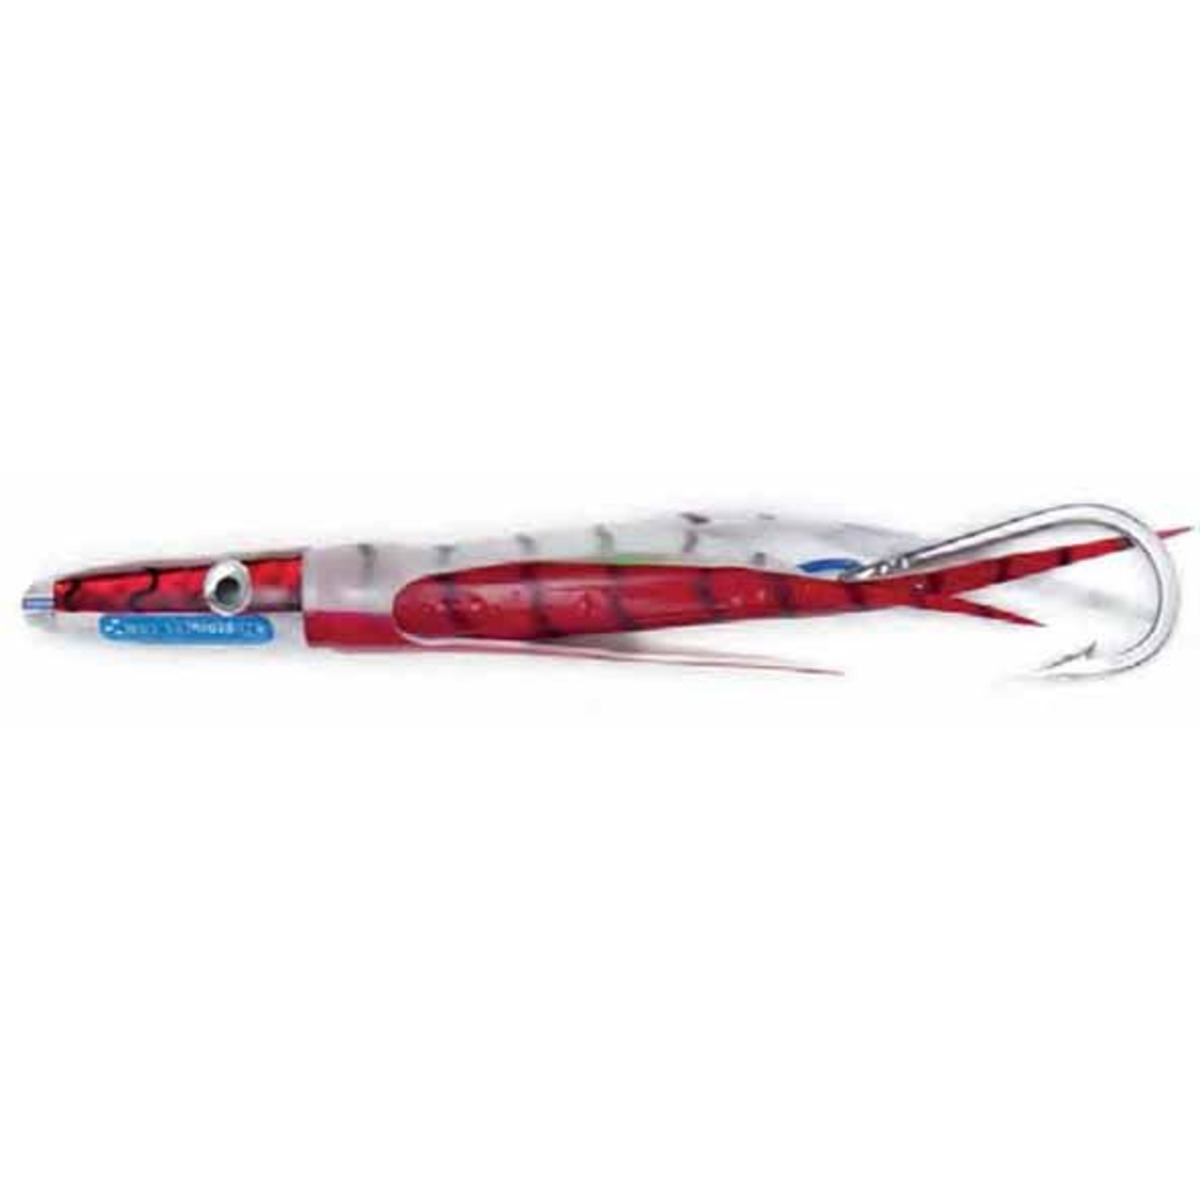 H2o Pro Shallow Tail - Red White - 12 cm